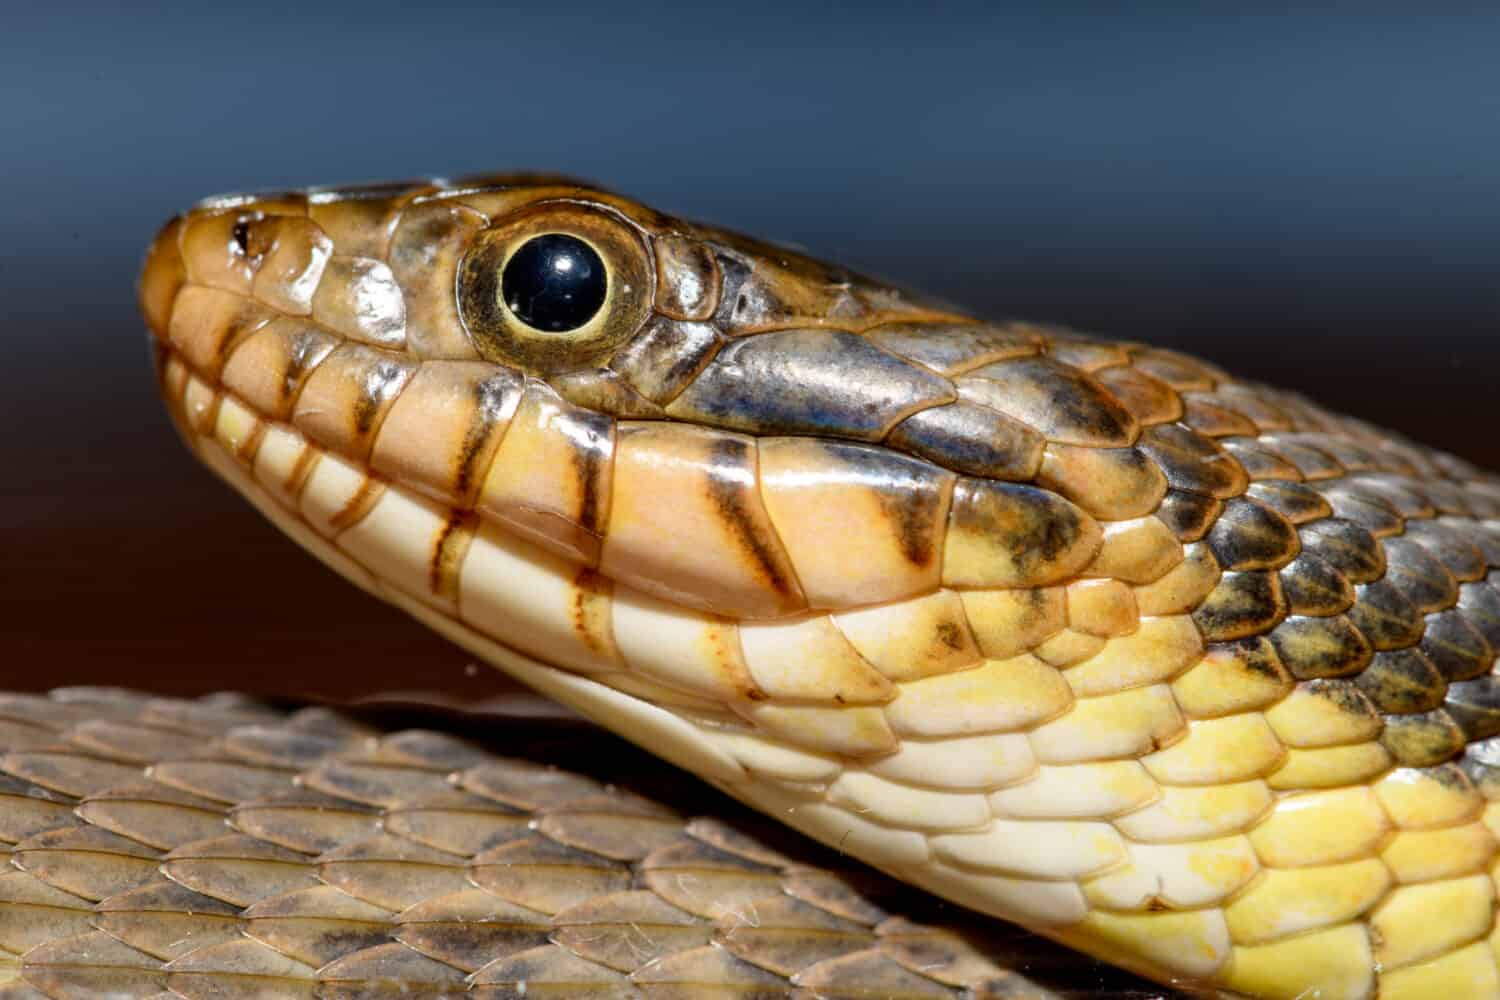 Plain-bellied water snake (Nerodia erythrogaster flavigaster) Coiled close-up of head